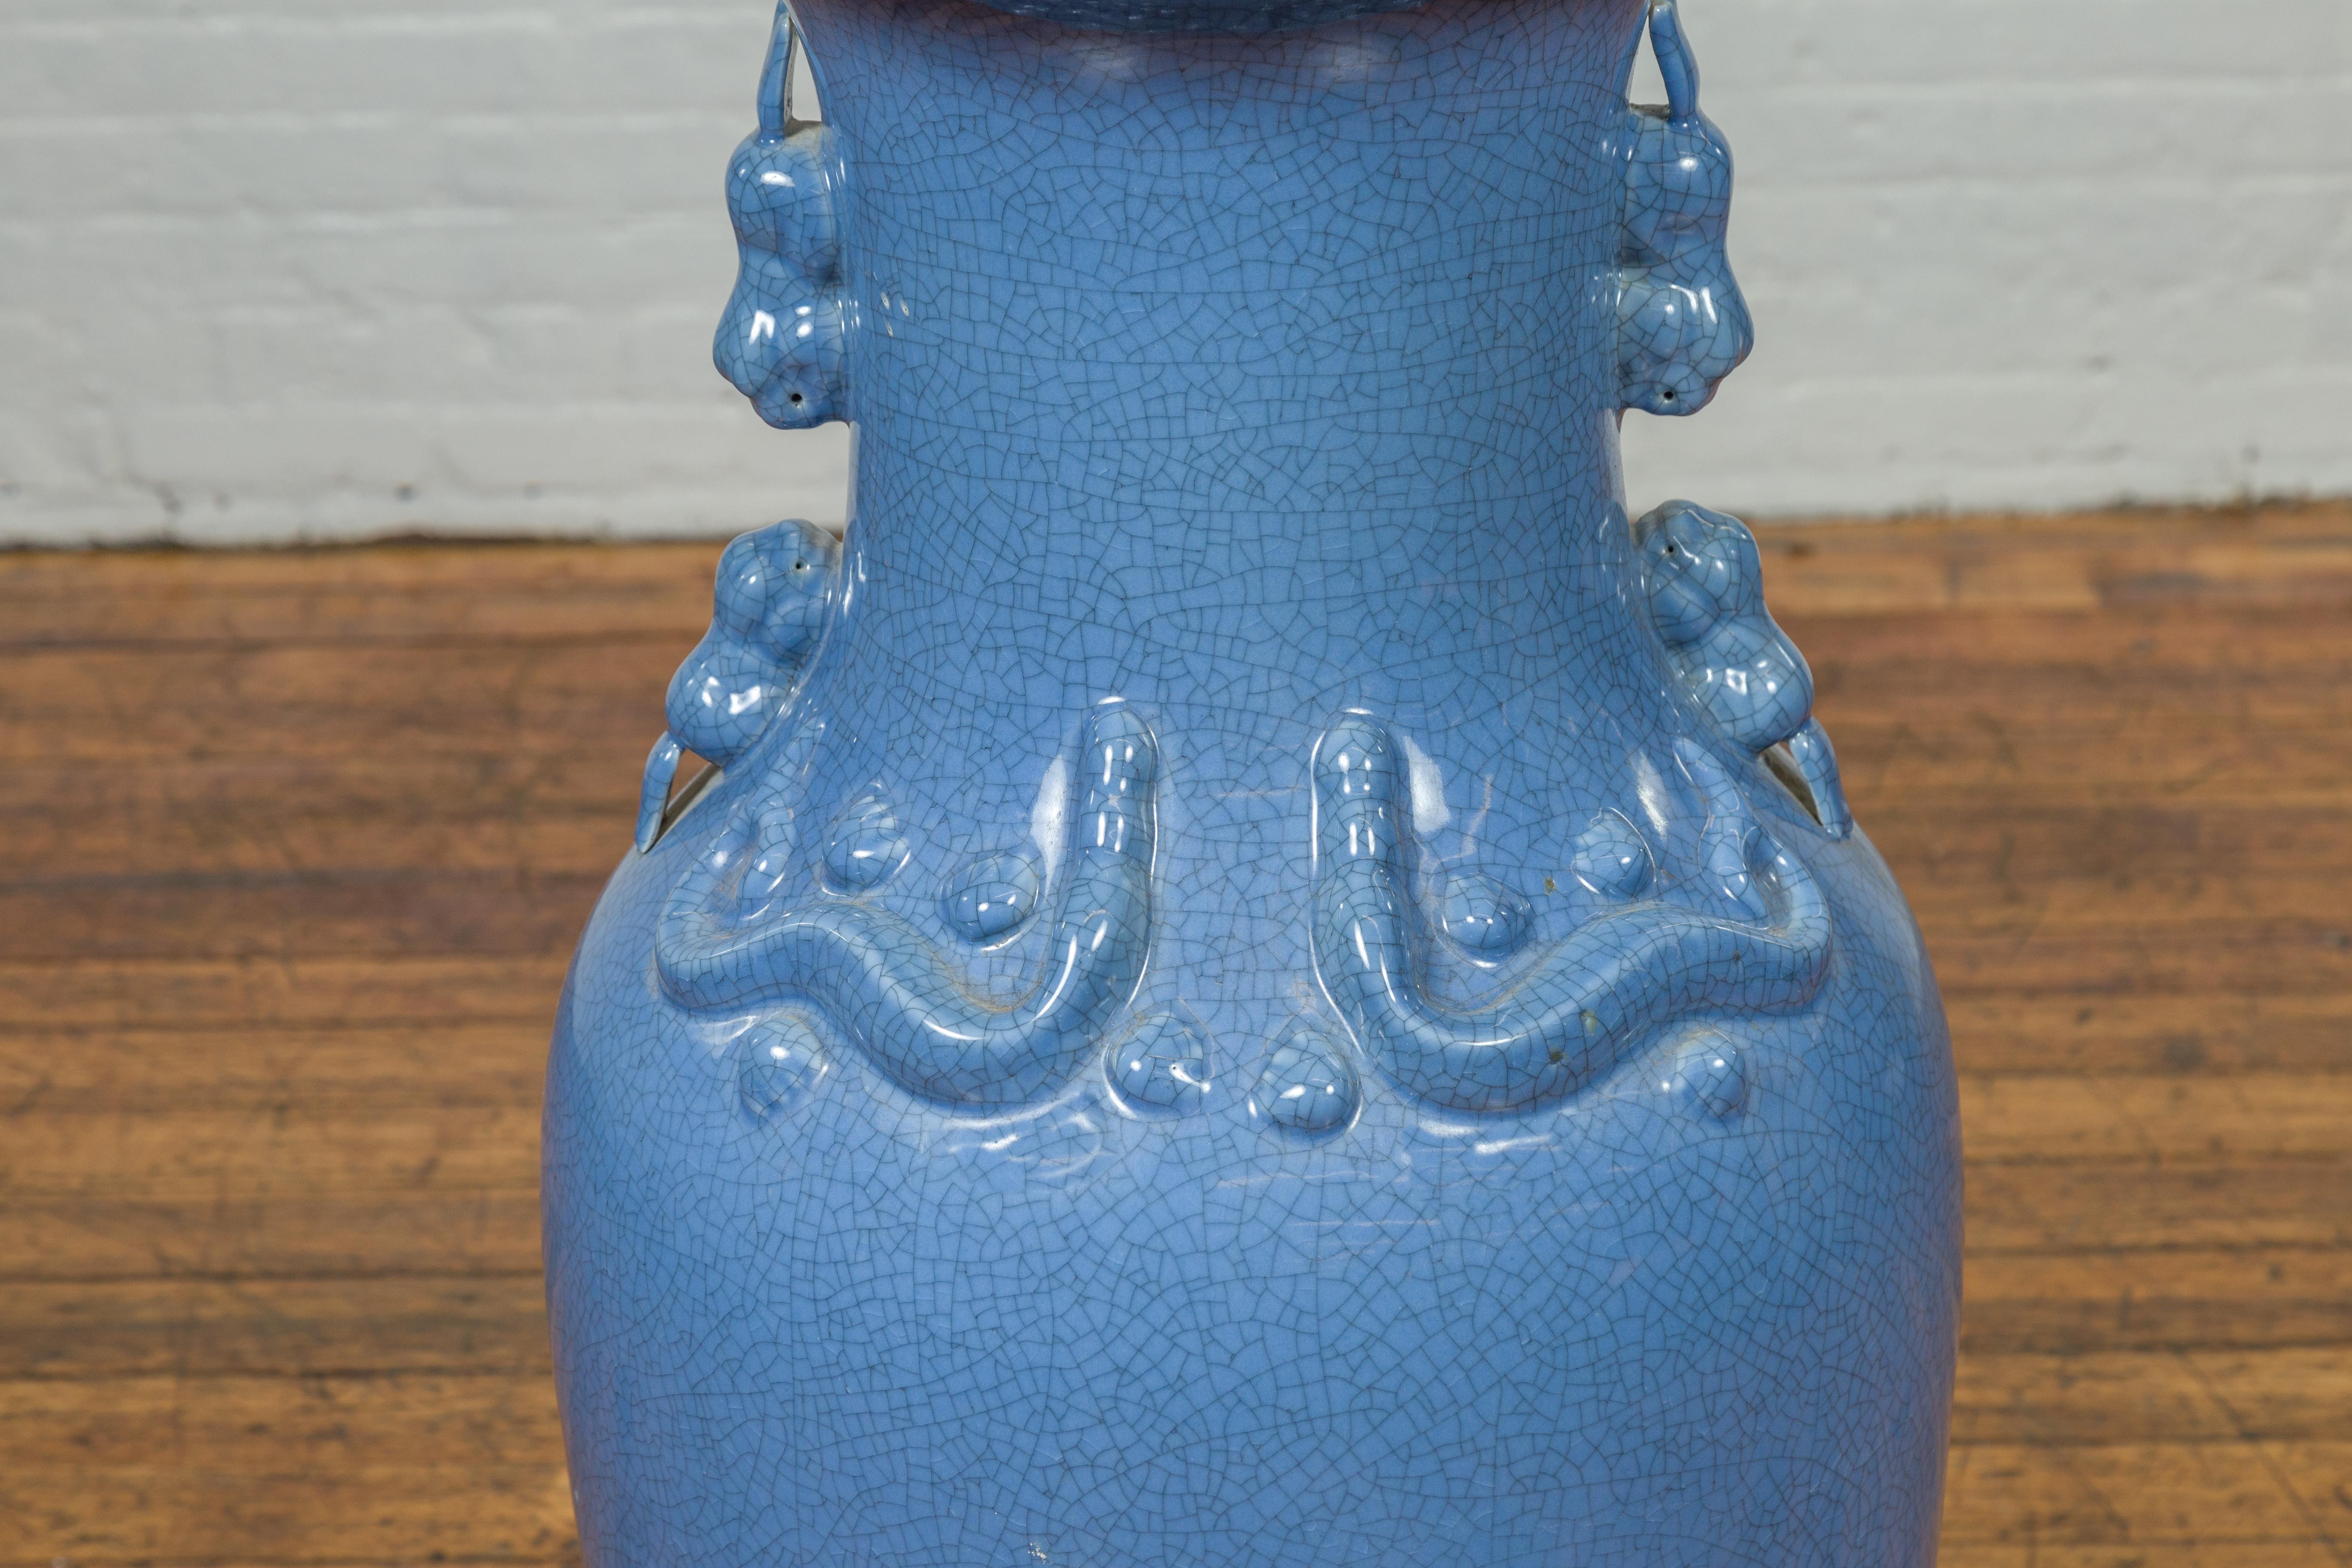 Ceremonial Altar Vase with Crackled Blue Glaze and Decorative Motifs In Good Condition For Sale In Yonkers, NY